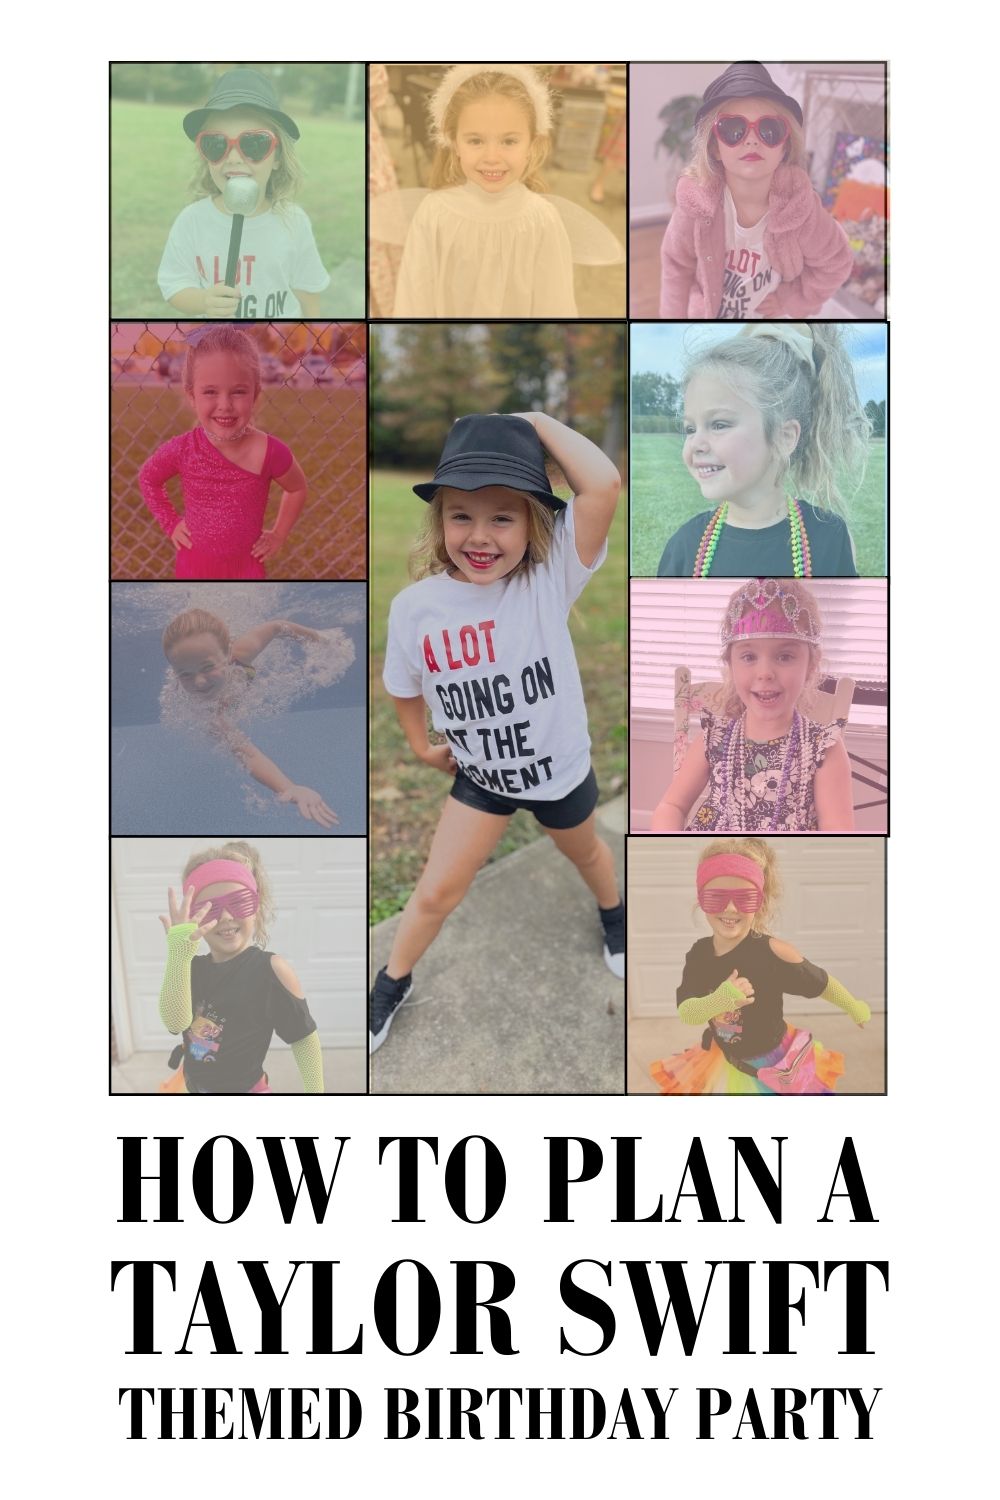 How to Plan a Taylor Swift Themed Birthday Party